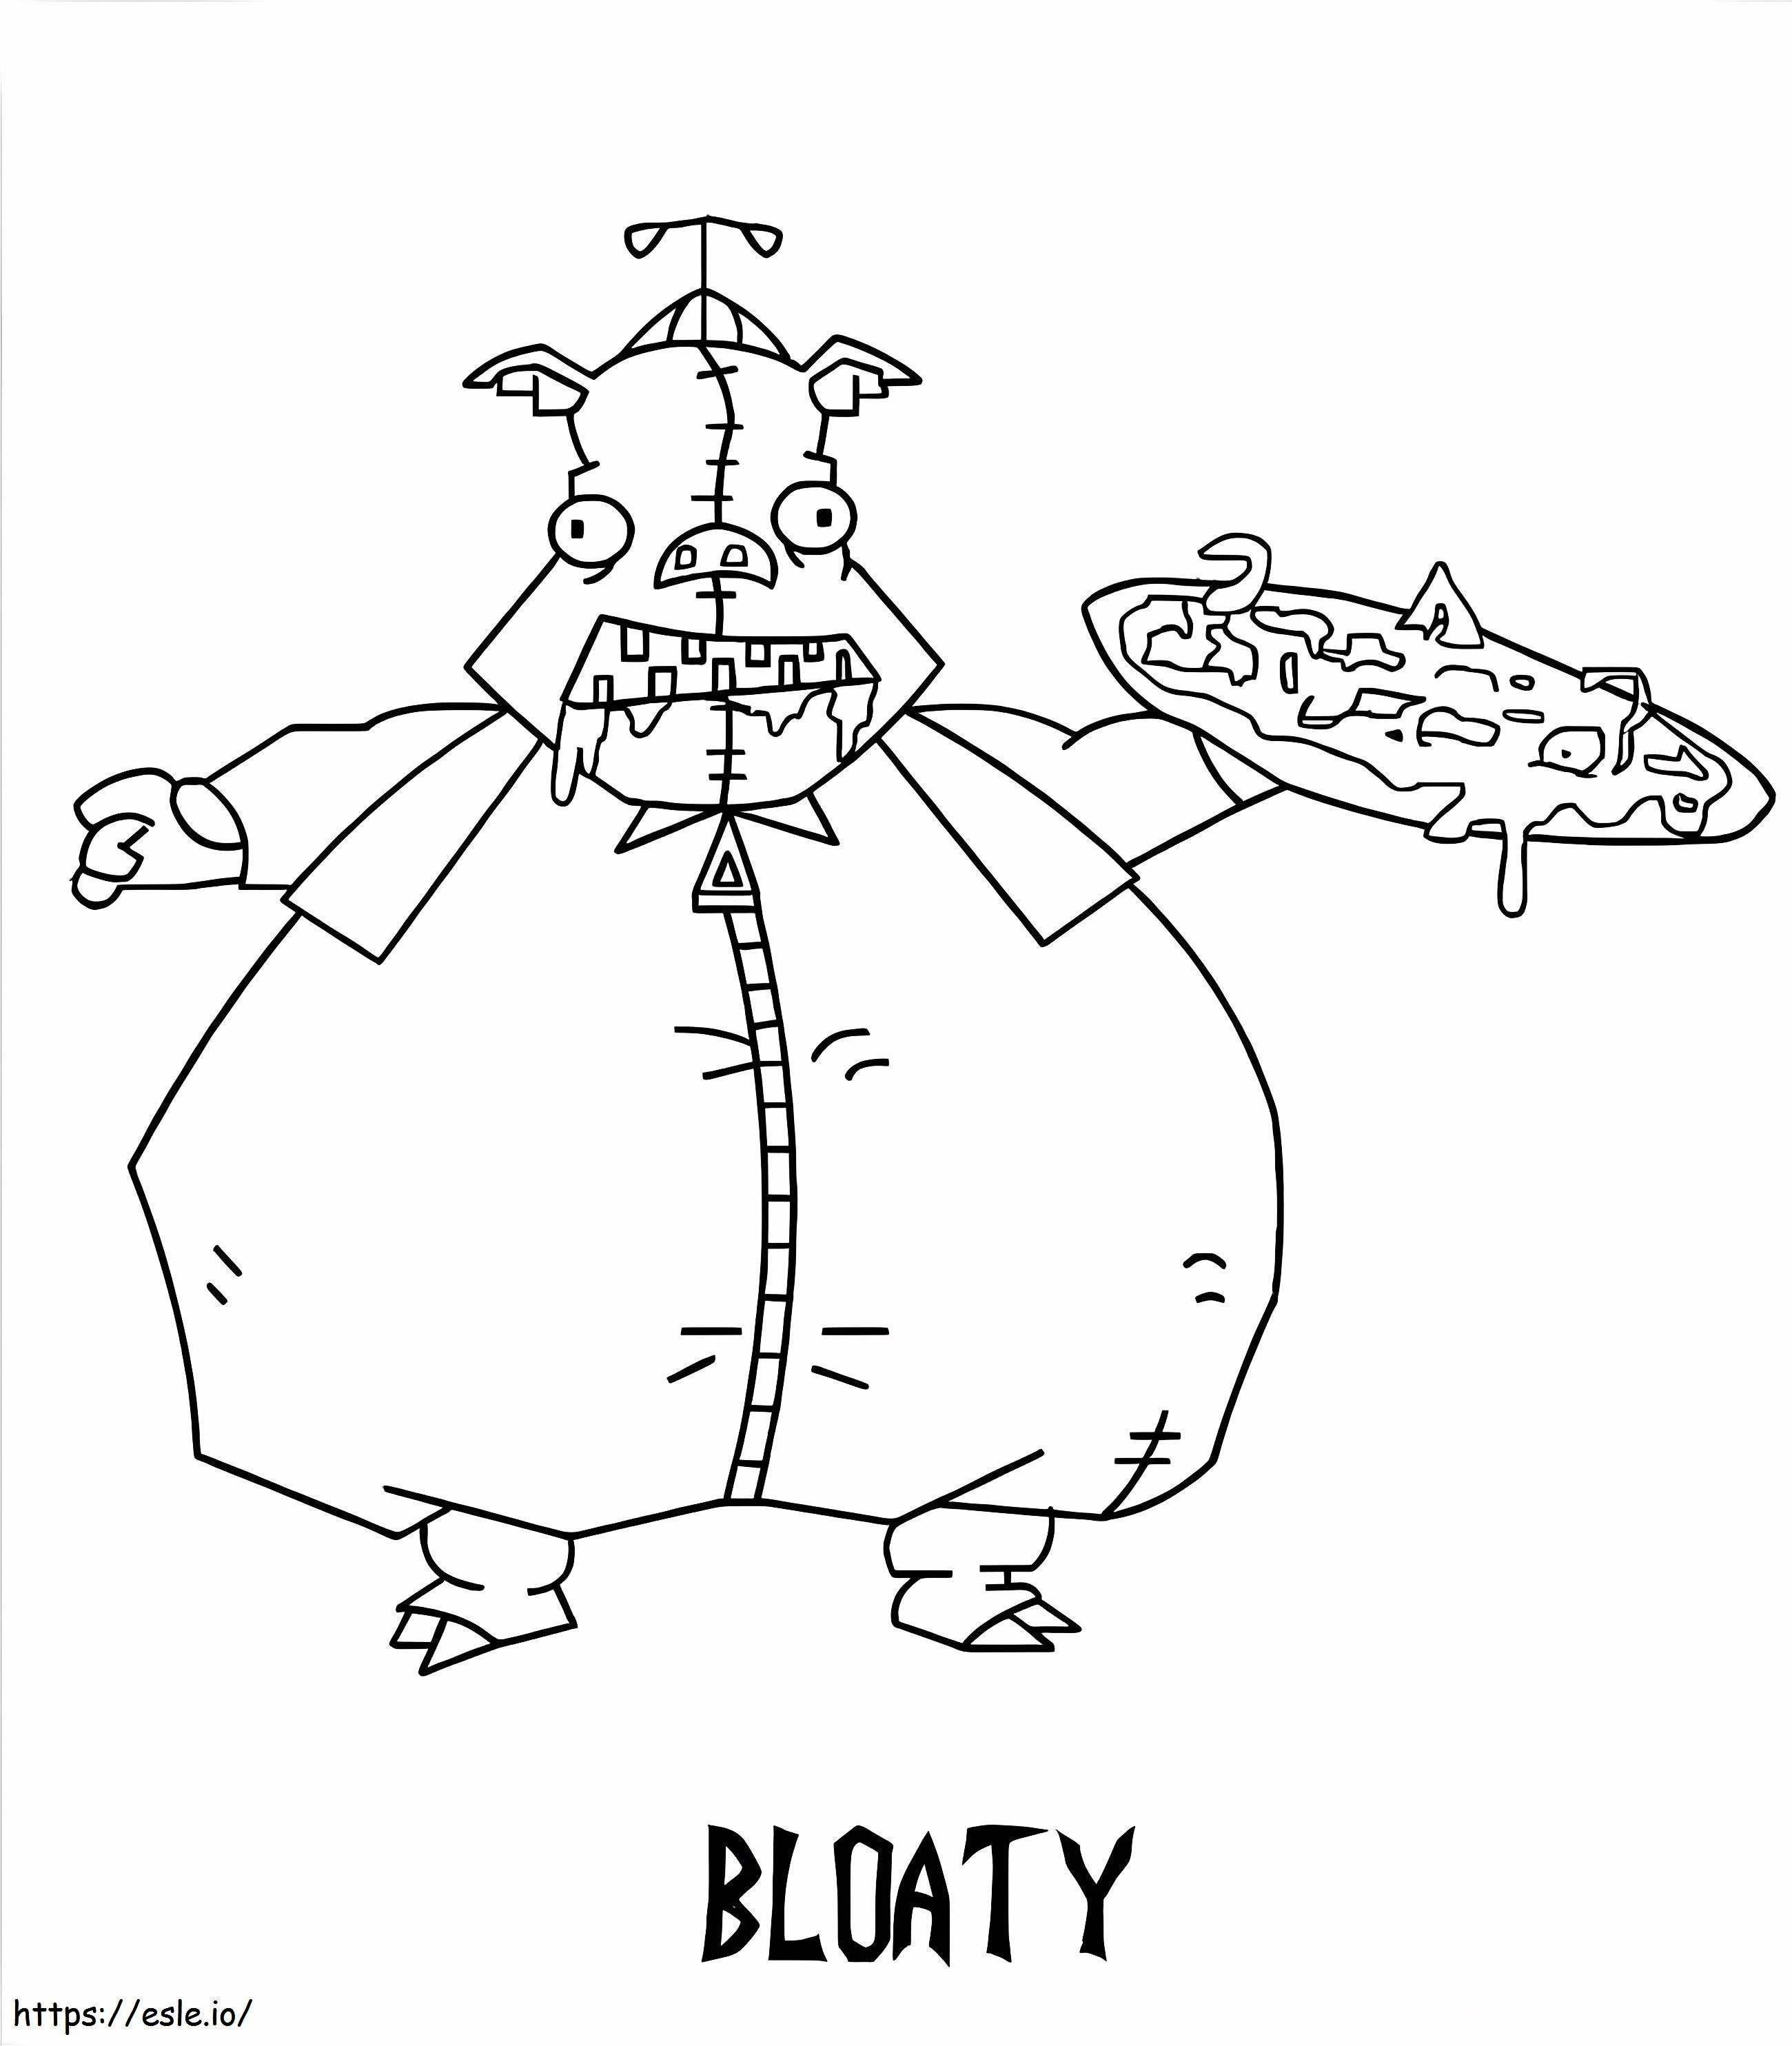 Bloaty From Invader Zim coloring page